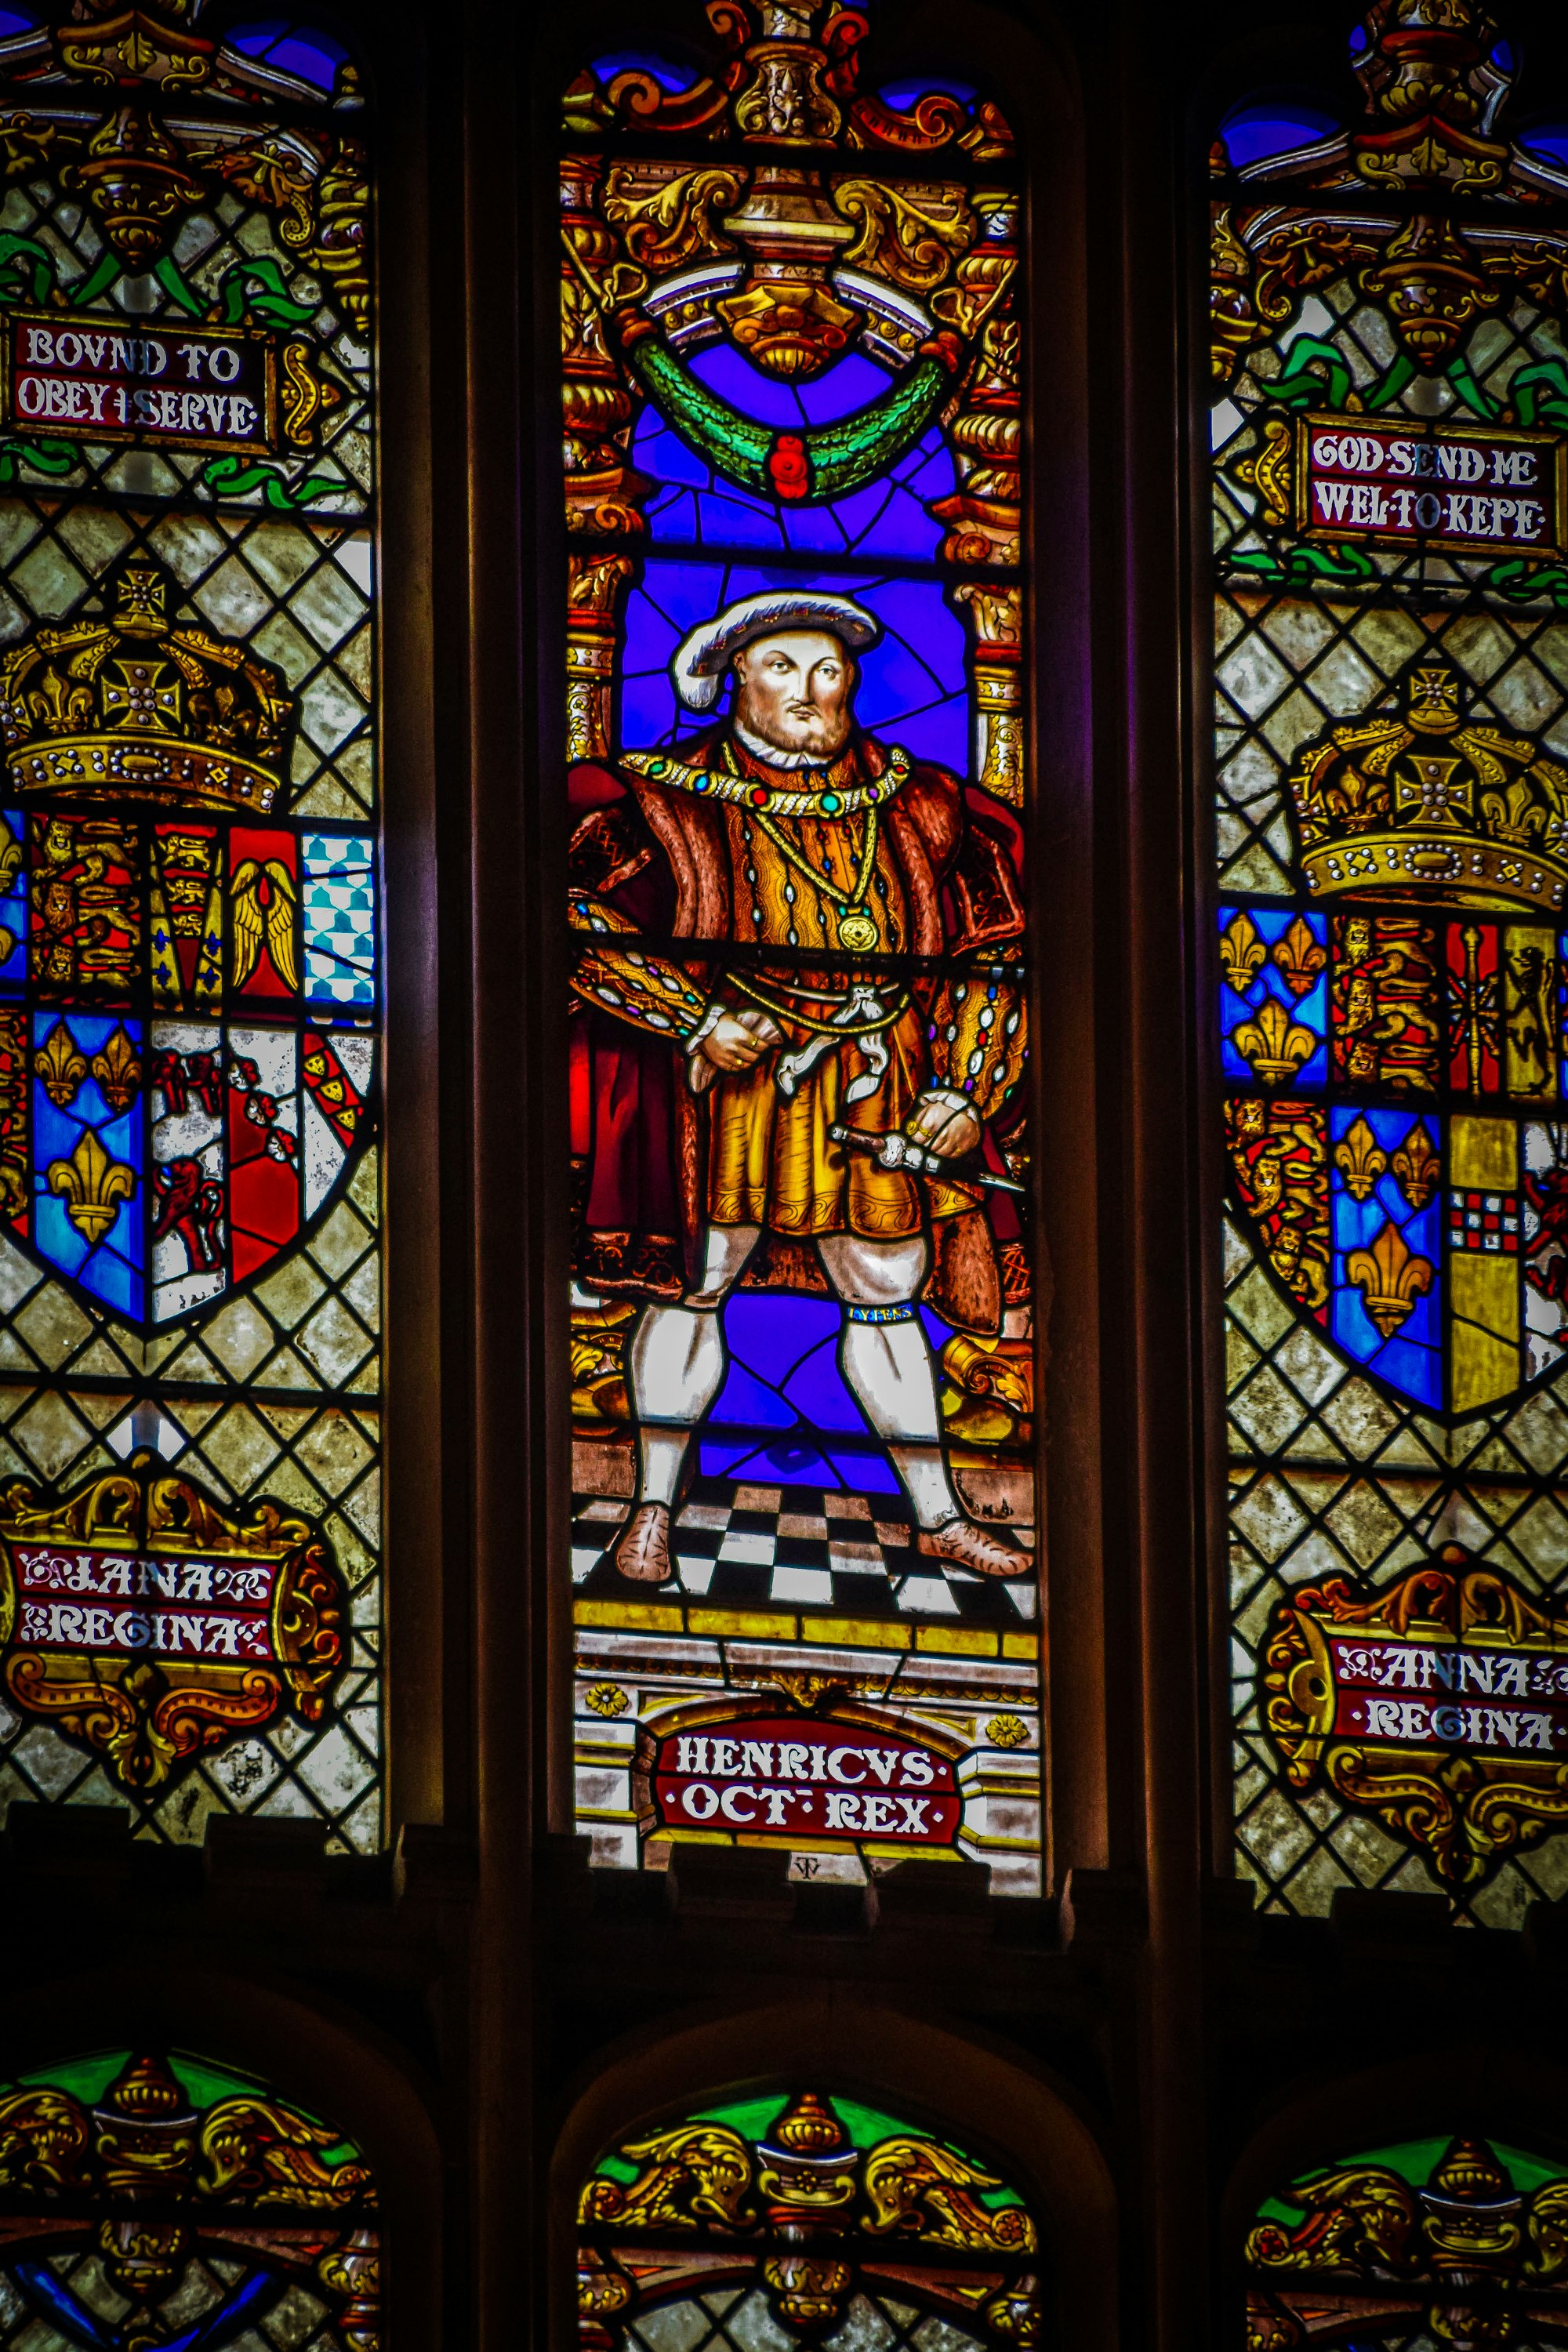 Stained glass at Hampton Court. 
474 Years today since the death of Henry VIII.